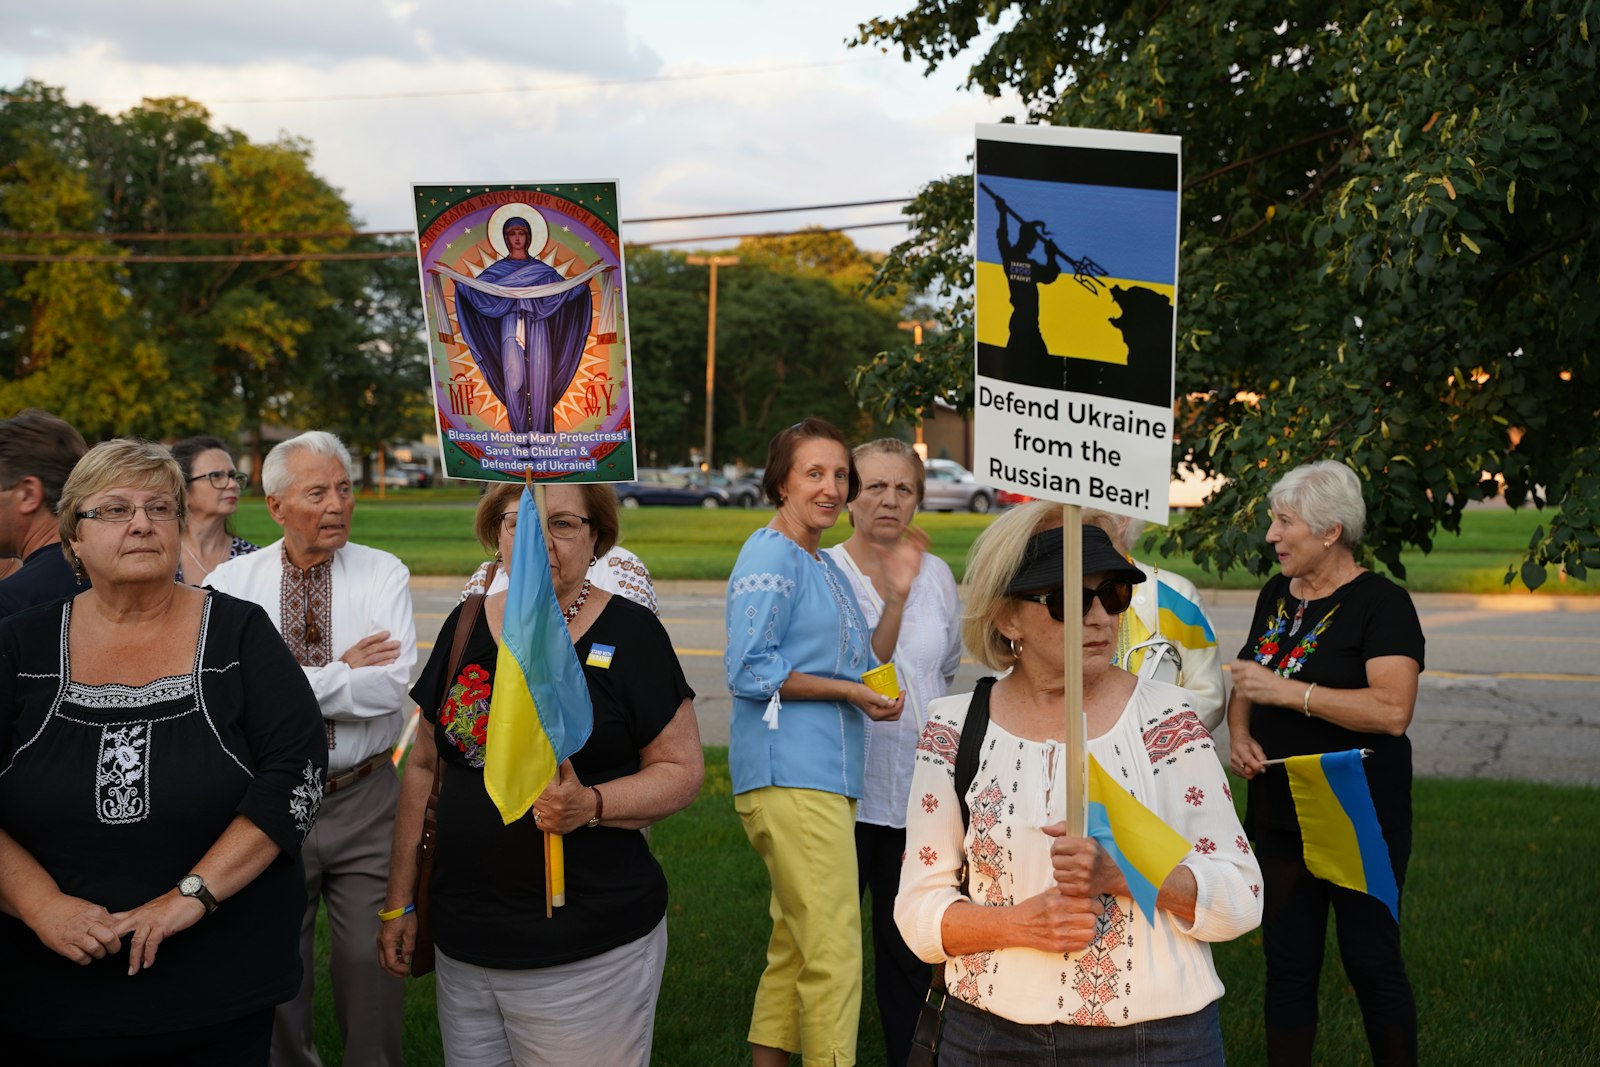 Members of the Ukrainian-American community gather at St. Josaphat Ukrainian Catholic Church in Warren for a prayer vigil in commemoration of the 31st anniversary of Ukraine's independence from the Soviet Union and the six-month anniversary of the Russian invasion of Ukraine.